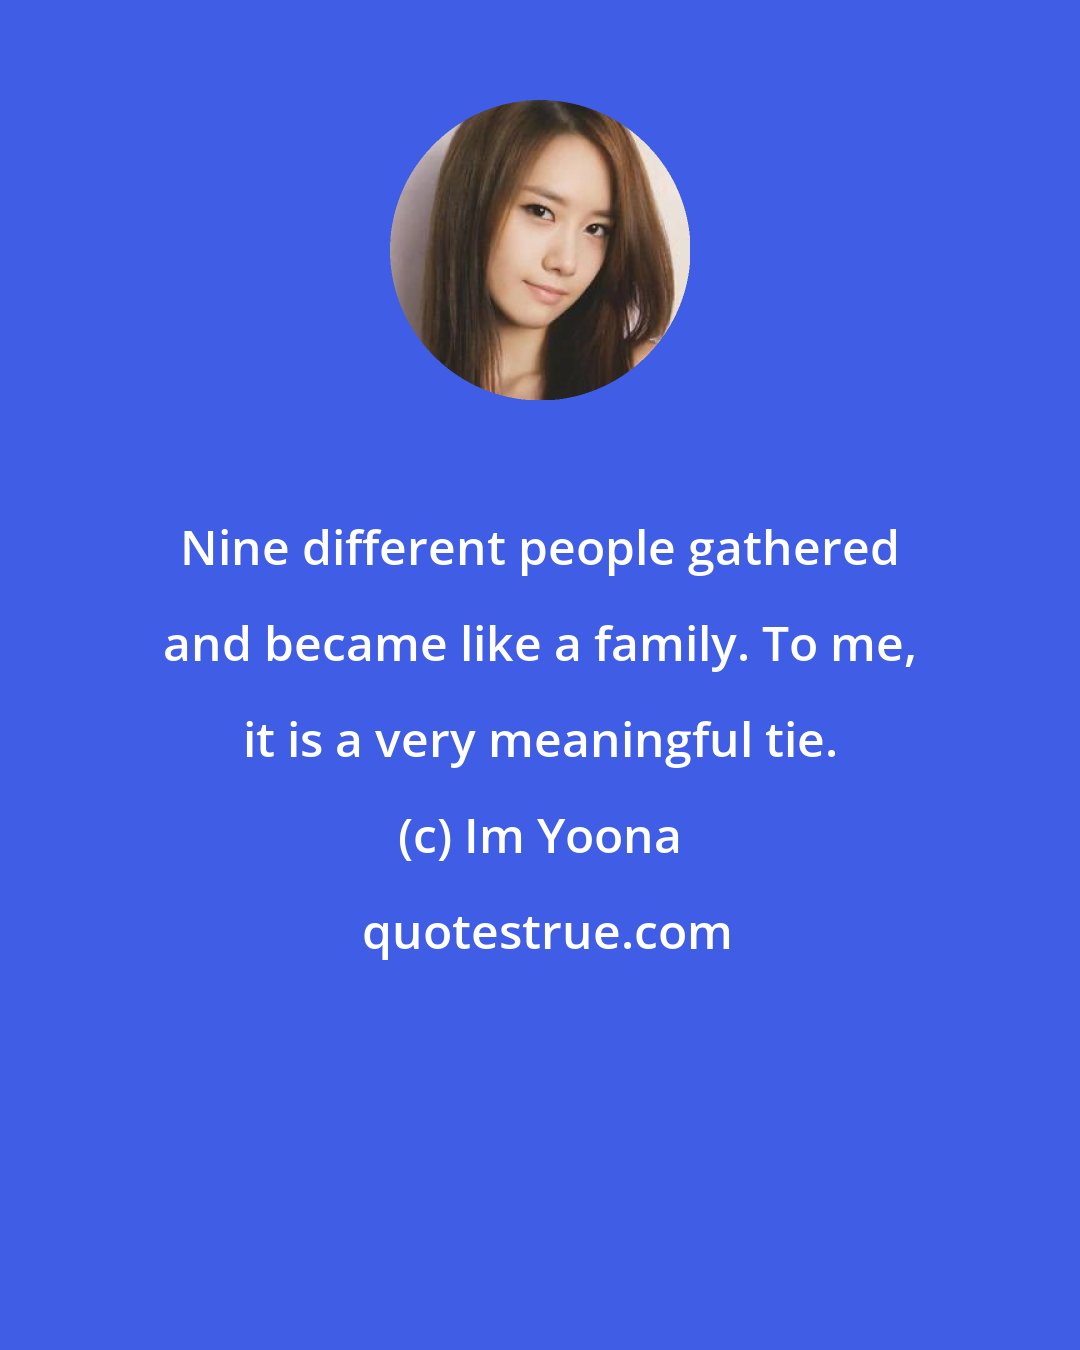 Im Yoona: Nine different people gathered and became like a family. To me, it is a very meaningful tie.